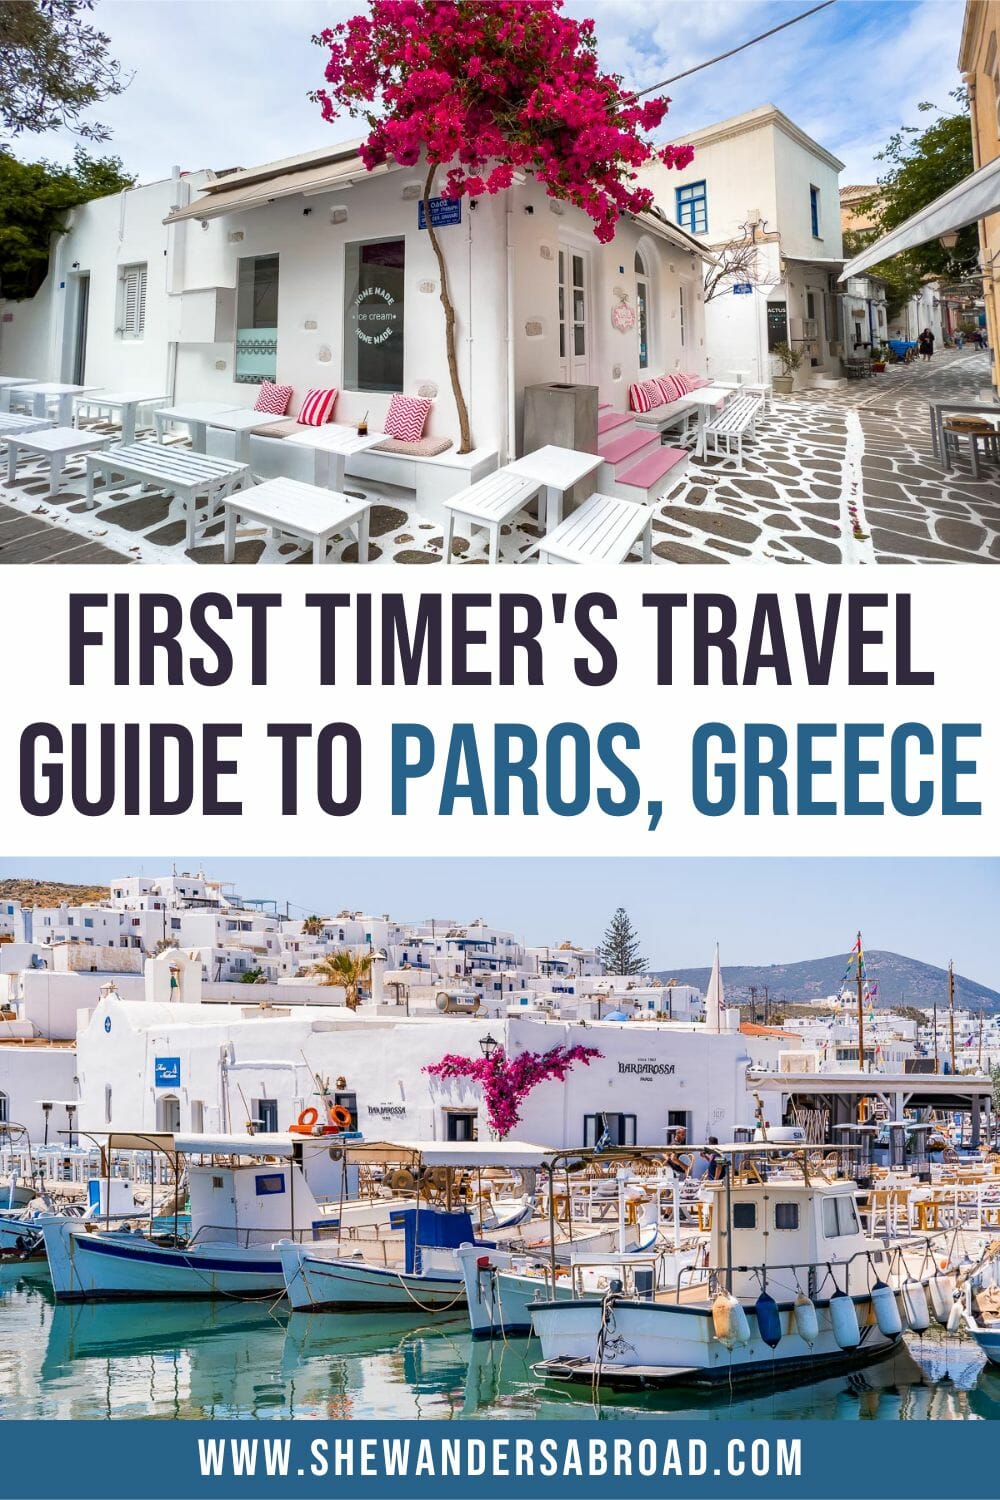 The Ultimate Paros Travel Guide for First-Timers